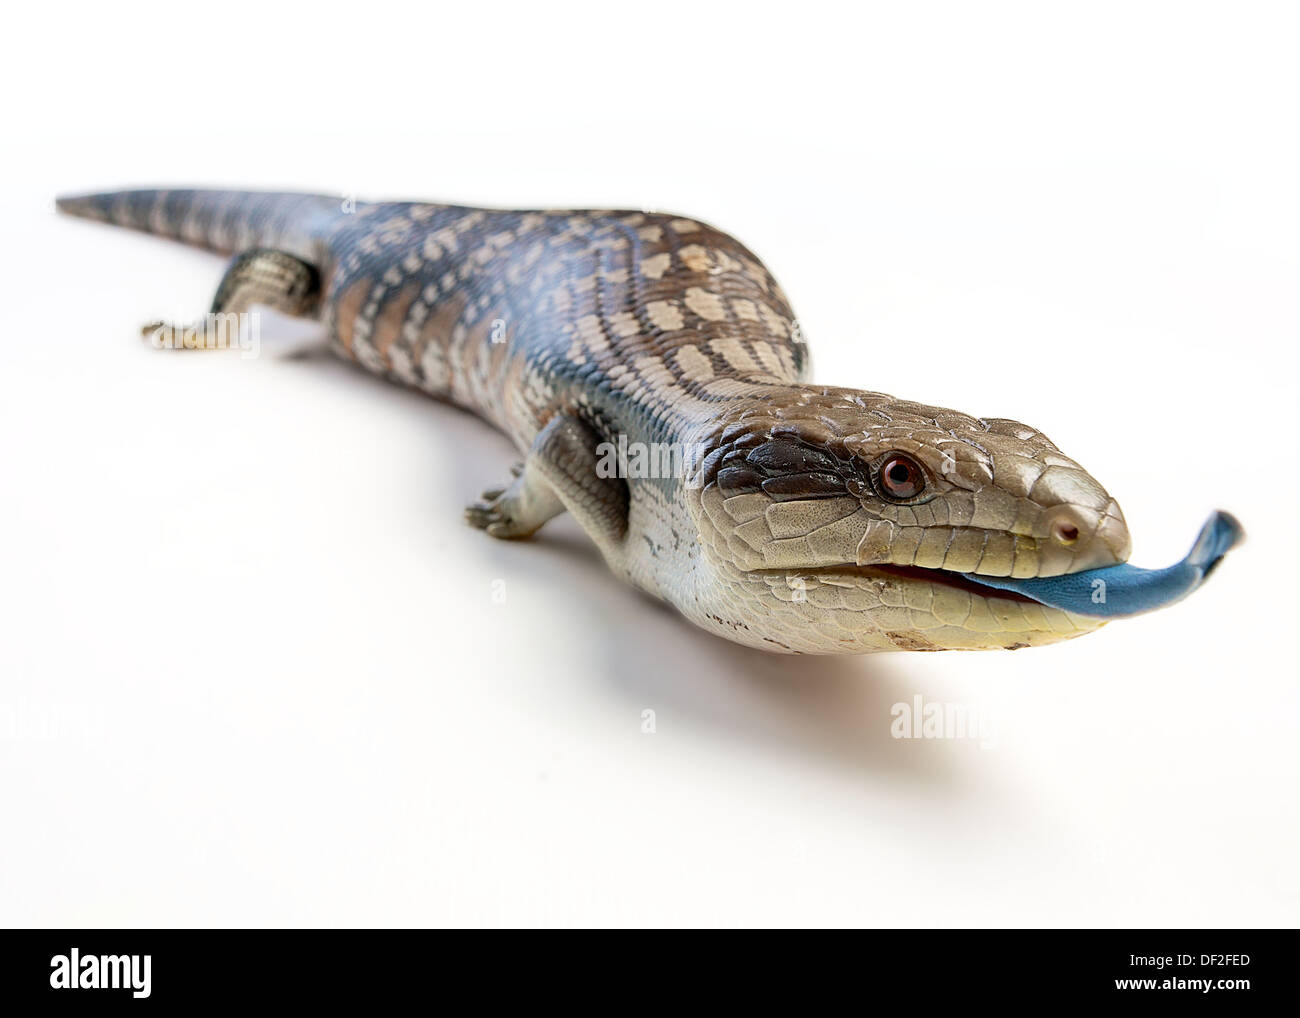 blue tongue lizard all in focus on a white background, tongue poking out Stock Photo